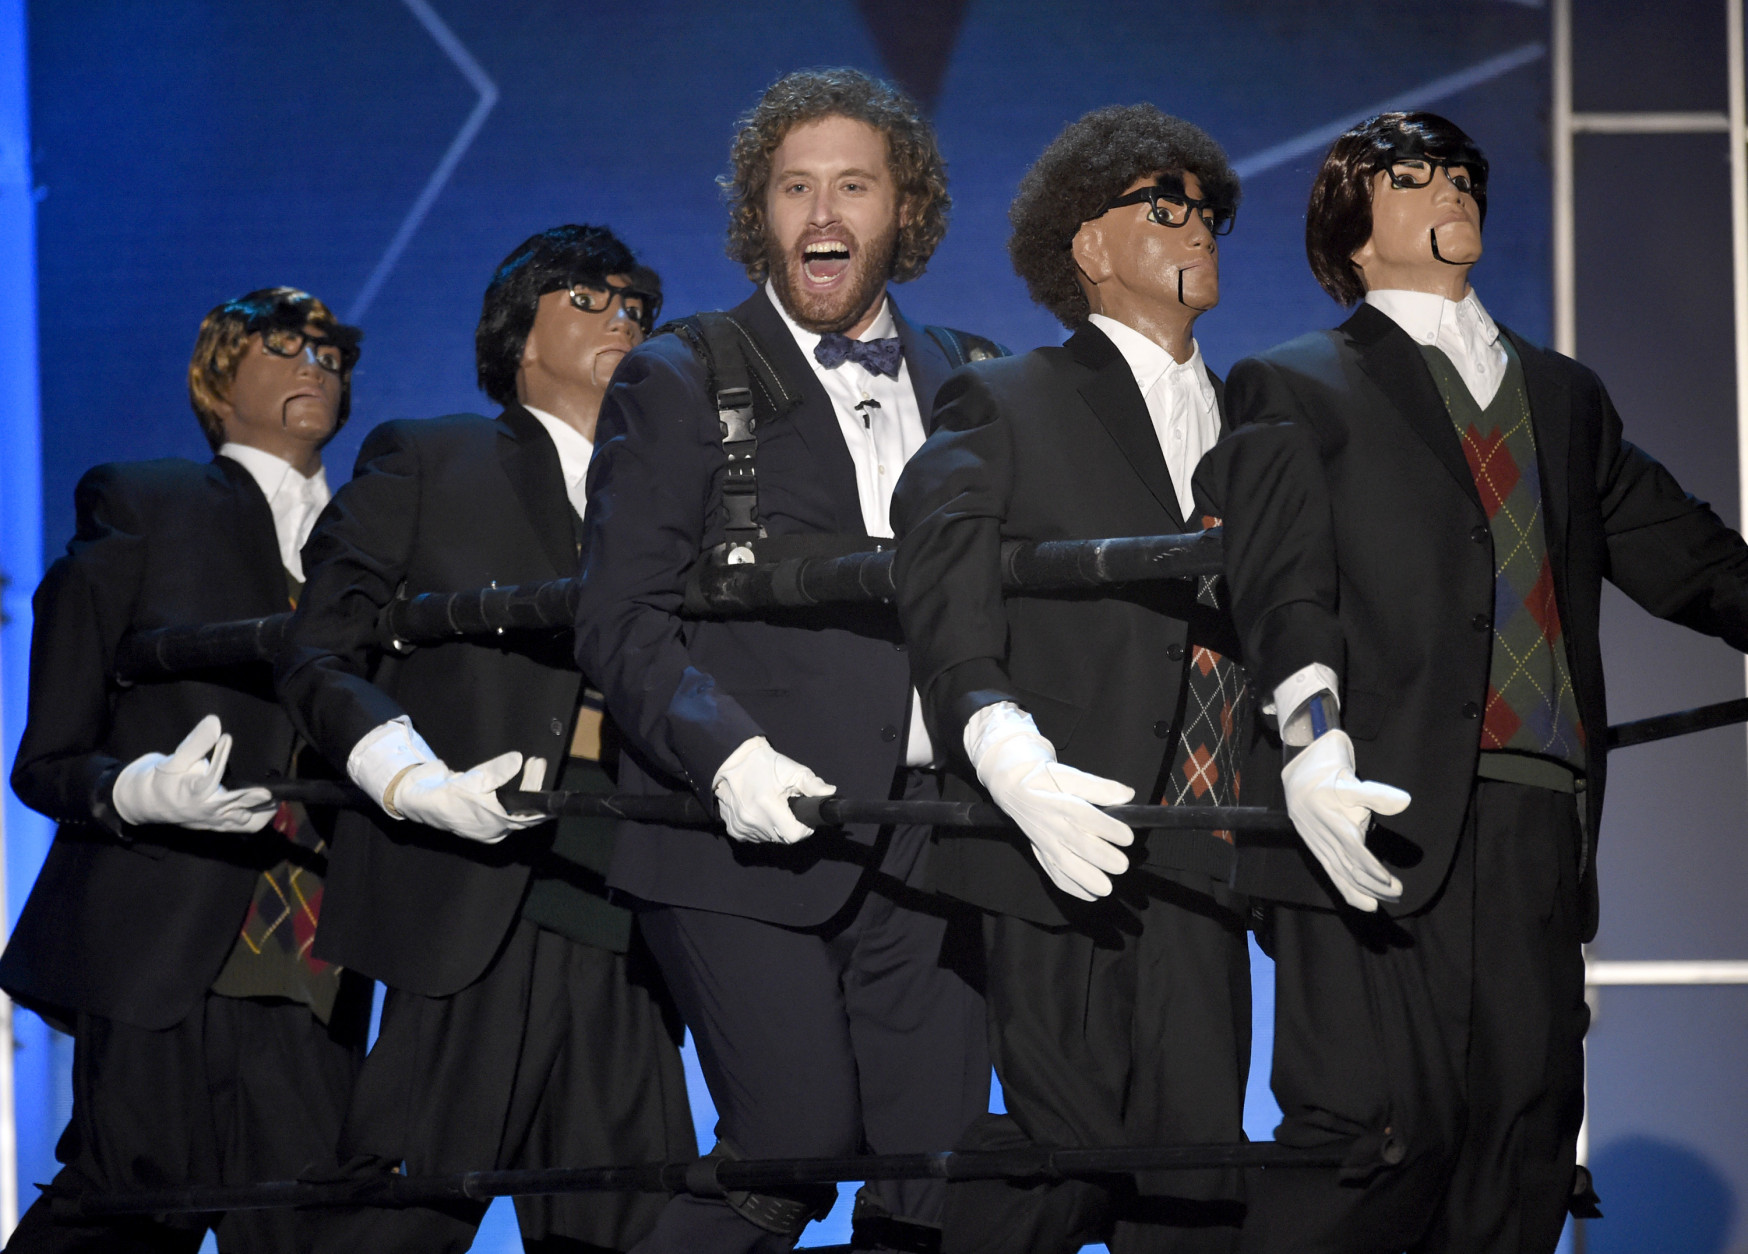 Host T.J. Miller, center, performs on stage at the 21st annual Critics' Choice Awards at the Barker Hangar on Sunday, Jan. 17, 2016, in Santa Monica, Calif. (Photo by Chris Pizzello/Invision/AP)